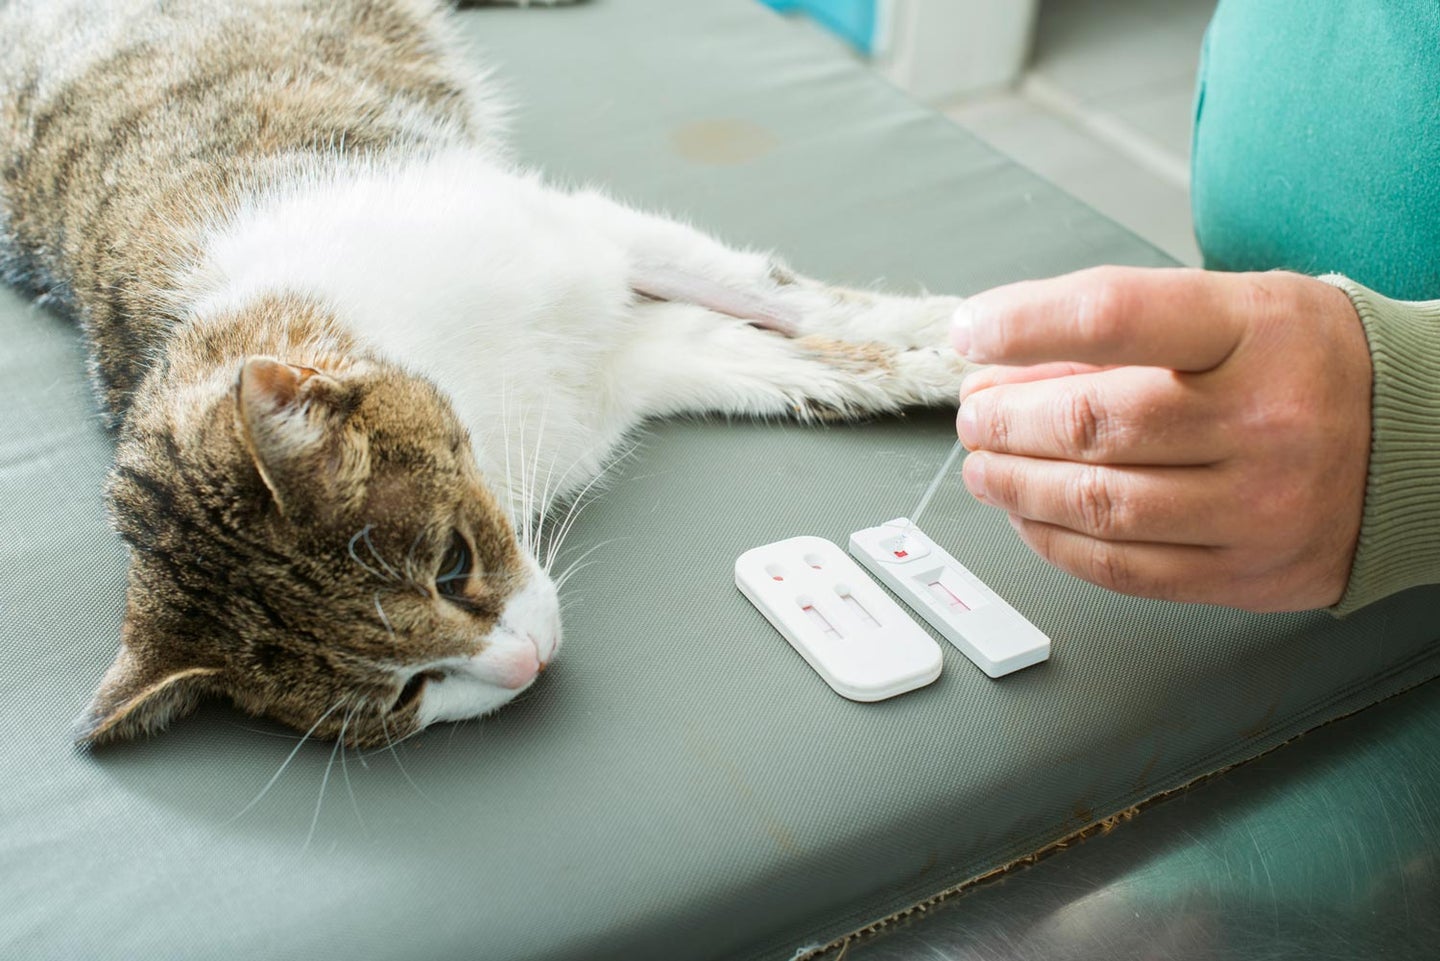 Pets can donate blood too | Popular Science